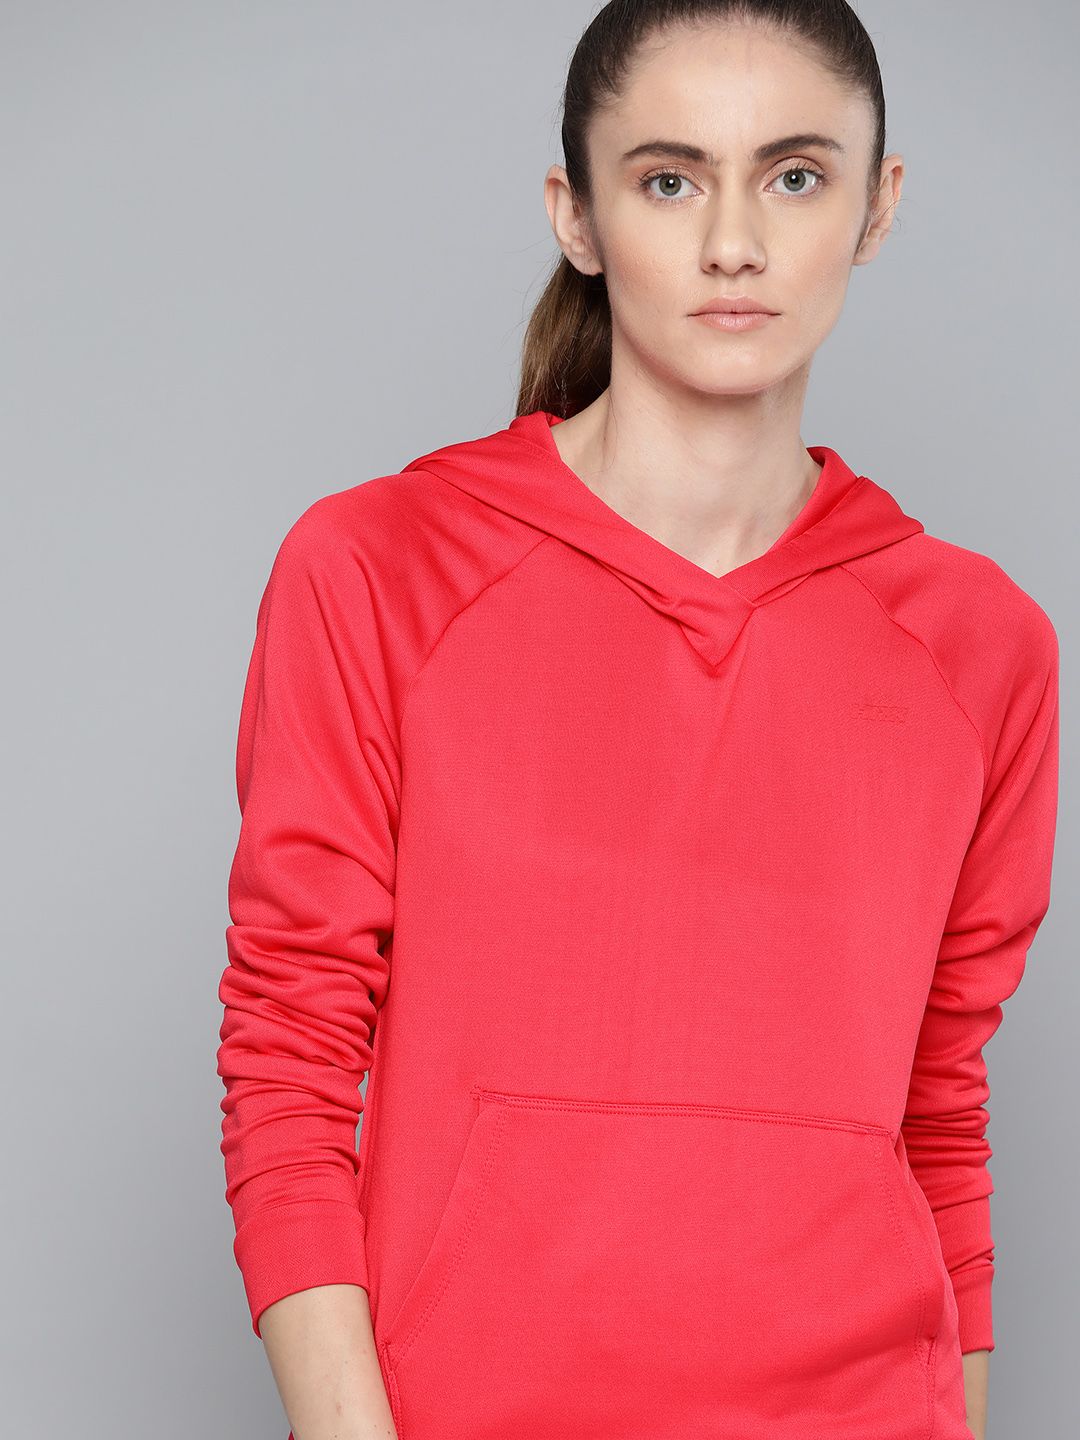 HRX By Hrithik Roshan Lifestyle Women Hothouse Pink Rapid-Dry Solid Sweatshirt Price in India